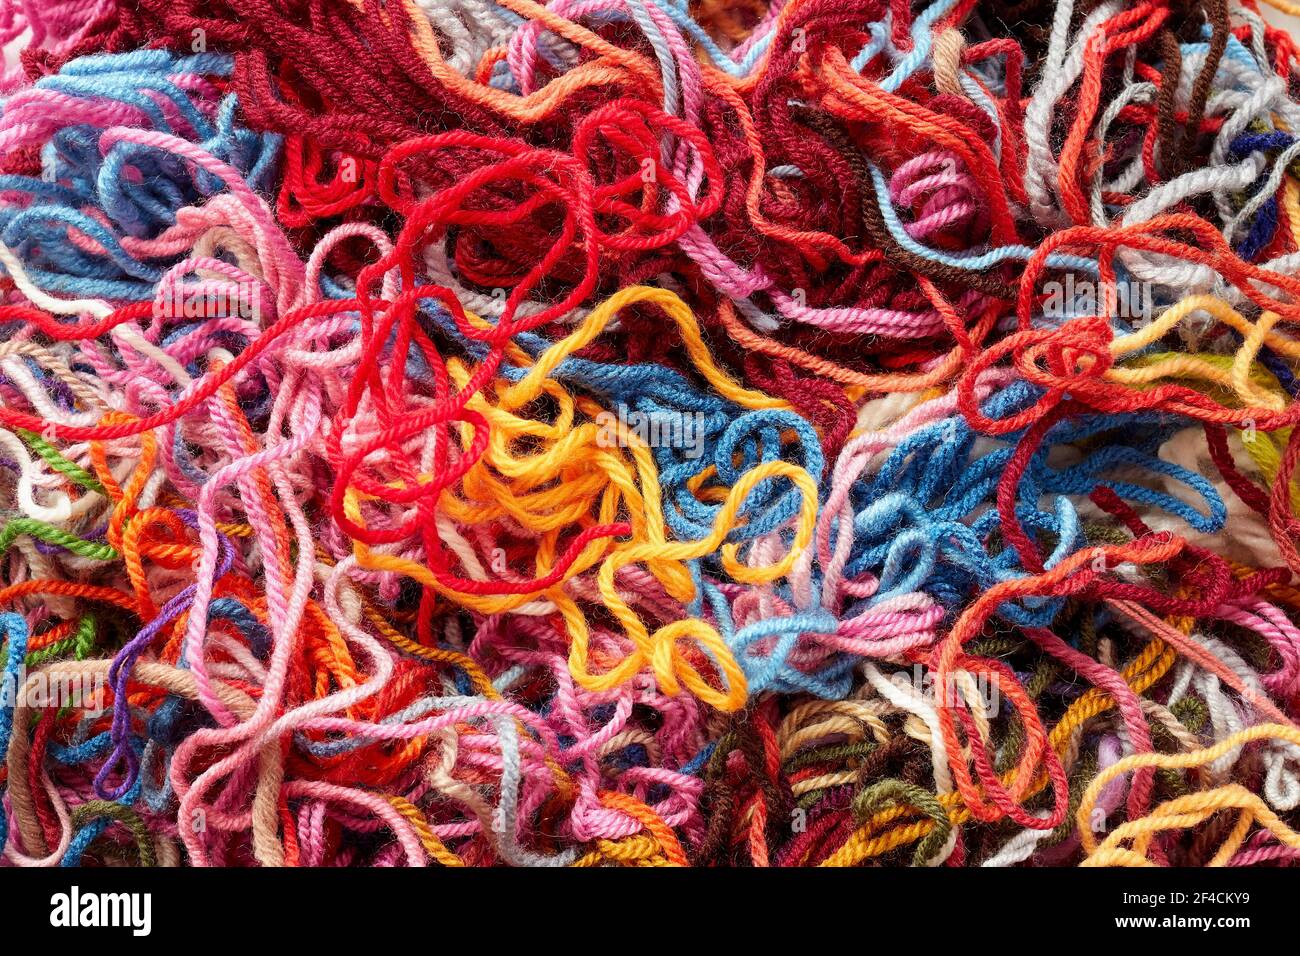 Colorful collection of wool for knitting and weaving. Full frame shot of multi colored yarn. Stock Photo